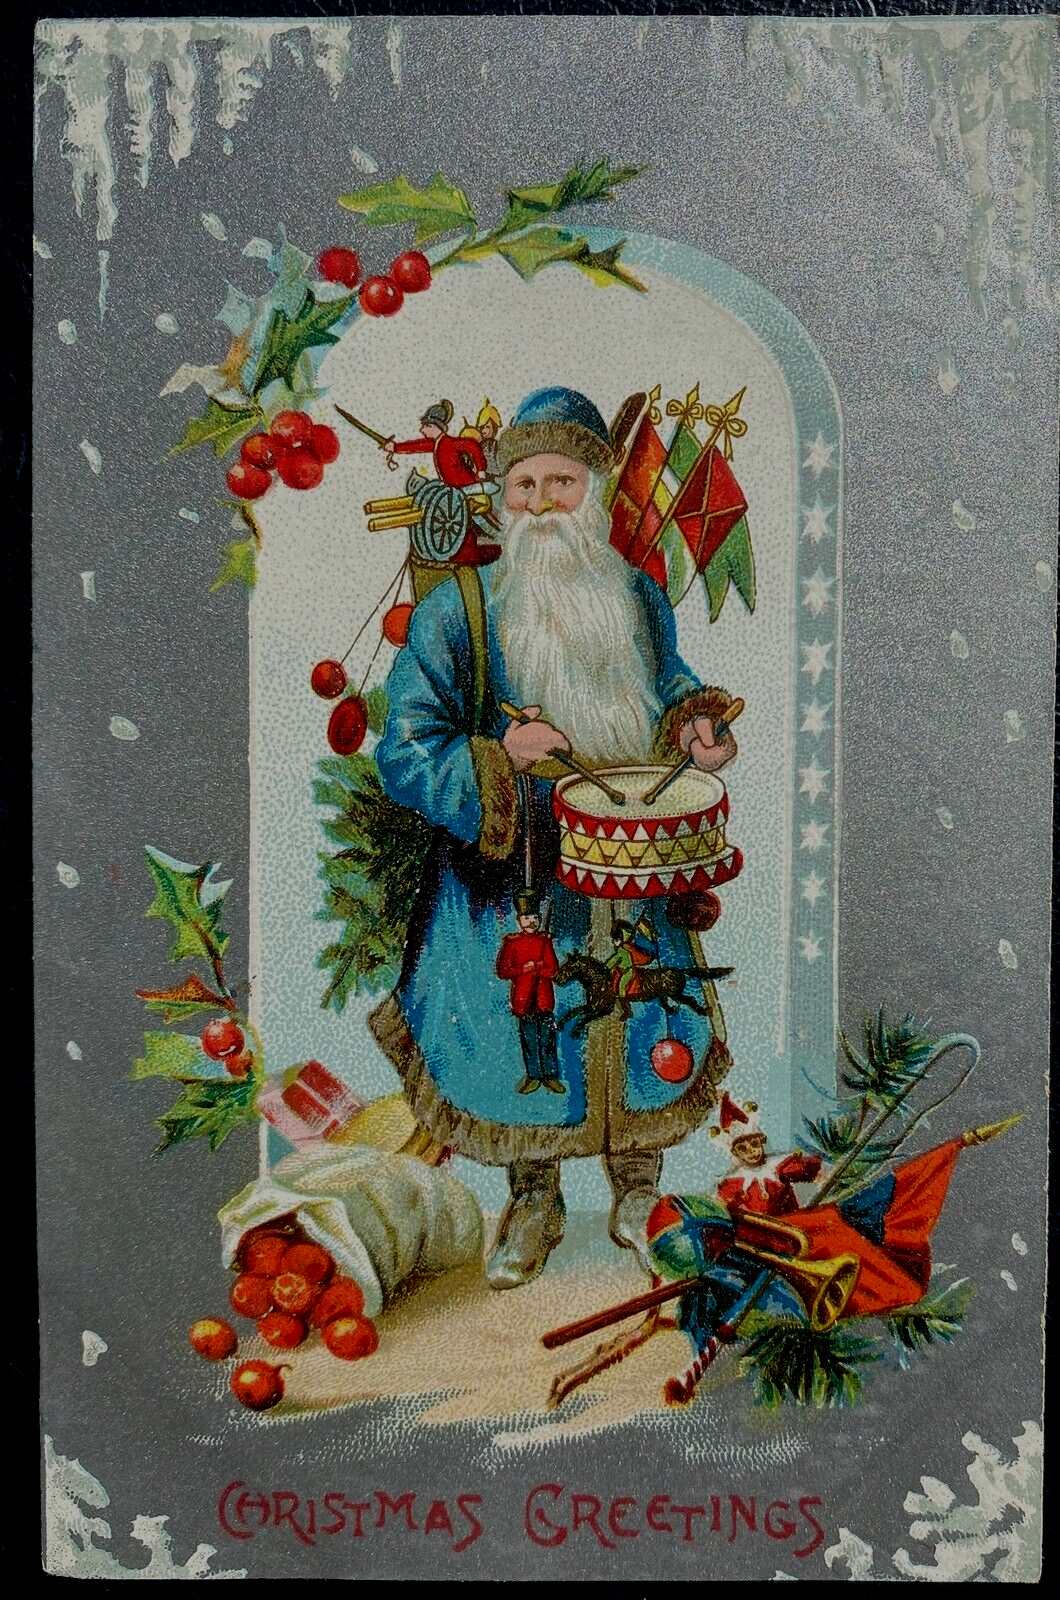 Blue  Robe Santa Claus with Flags~Toys~Drum~Apples~1910 Christmas Postcard~k274